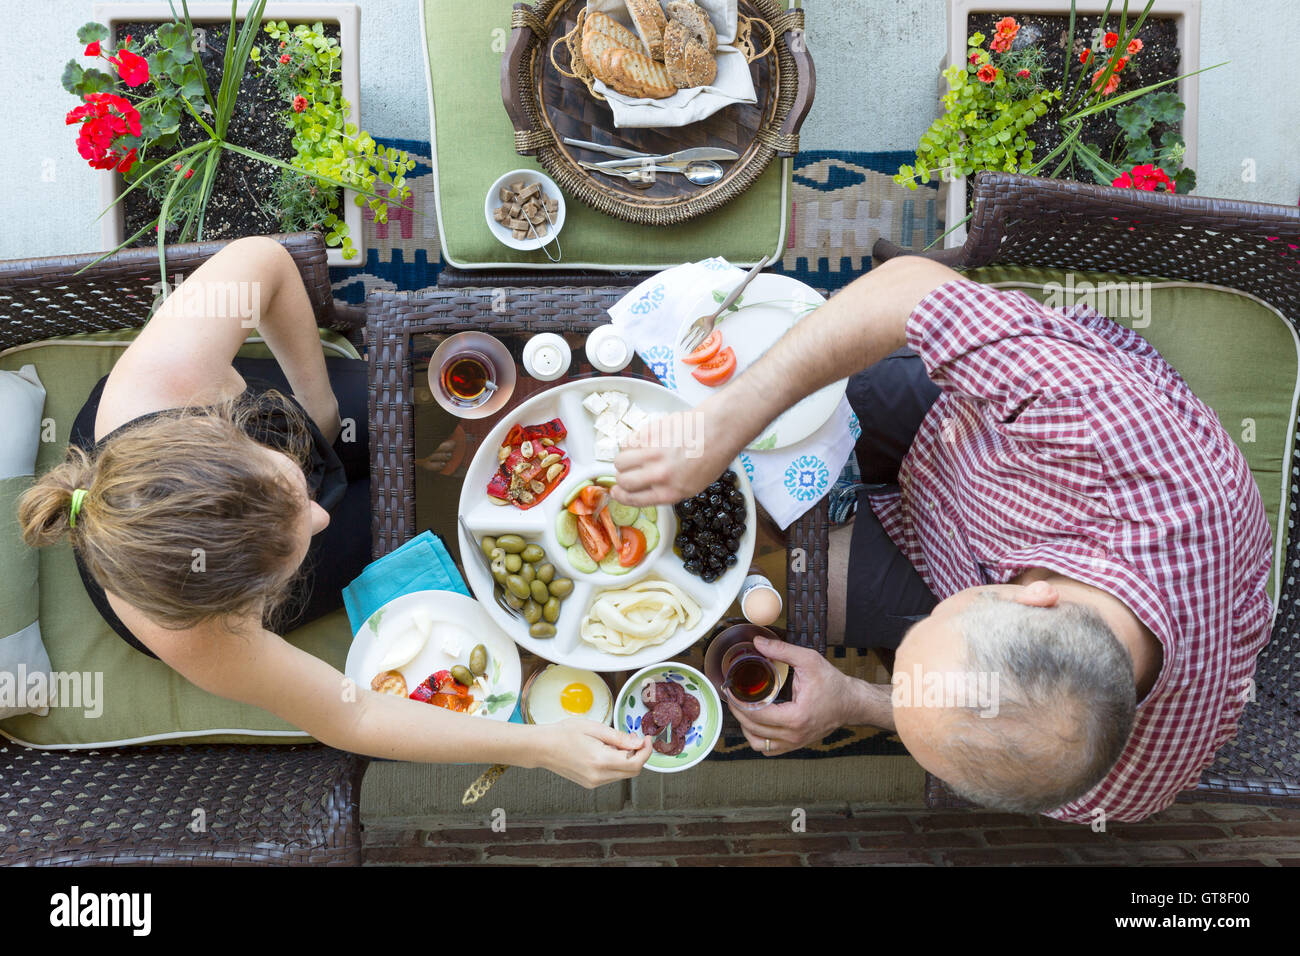 Man and woman enjoying an outdoor Turkish breakfast sitting together at a small intimate table helping themselves to a selection Stock Photo